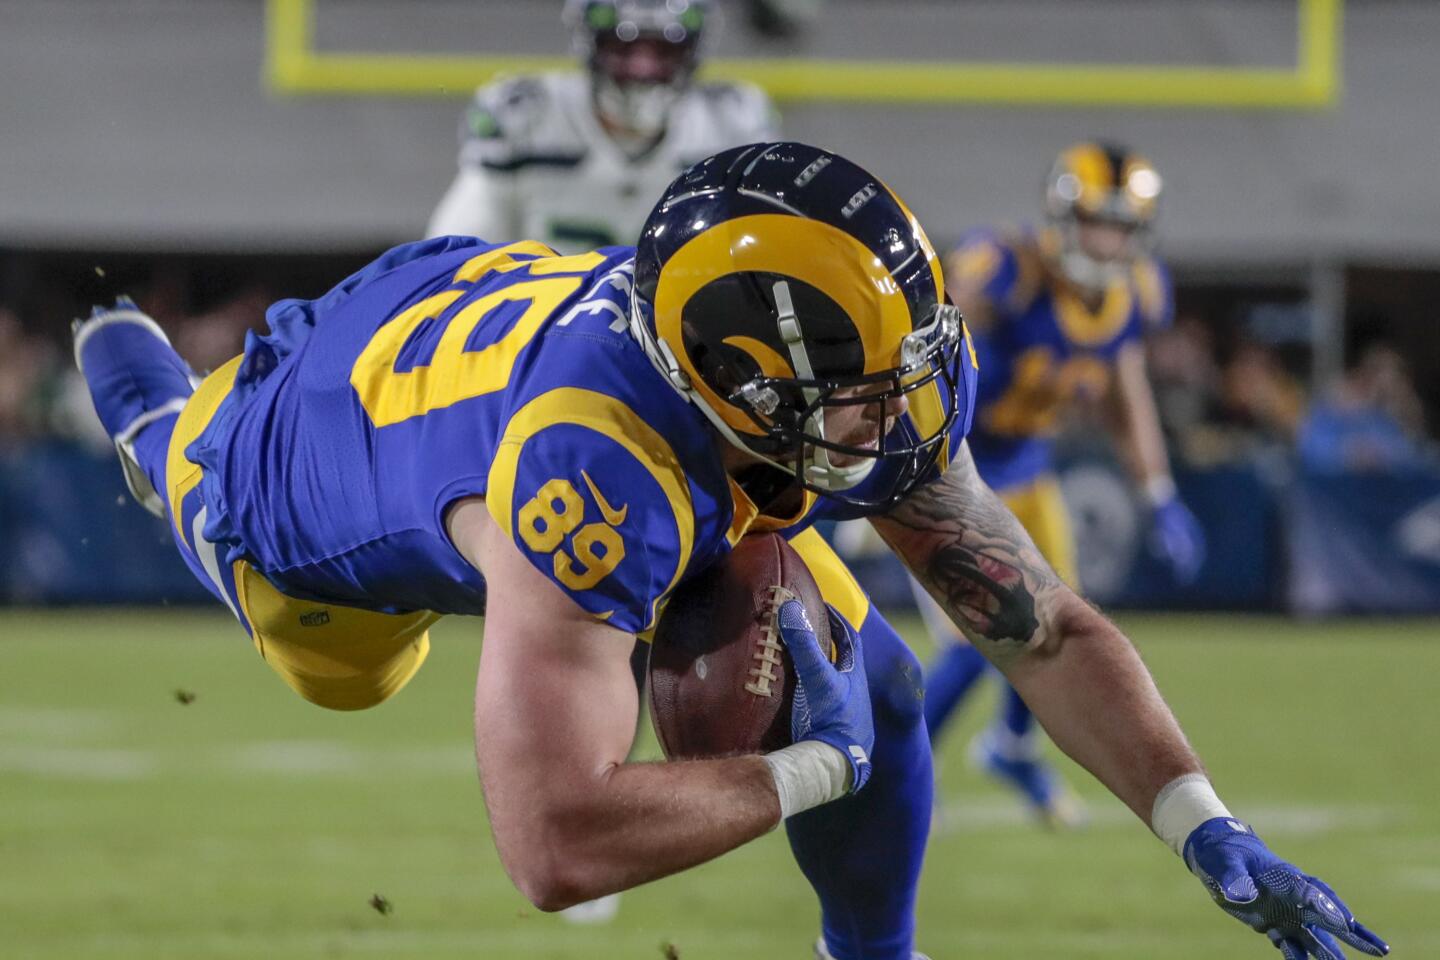 Rams tight end Tyler Higbee hauls in a pass.